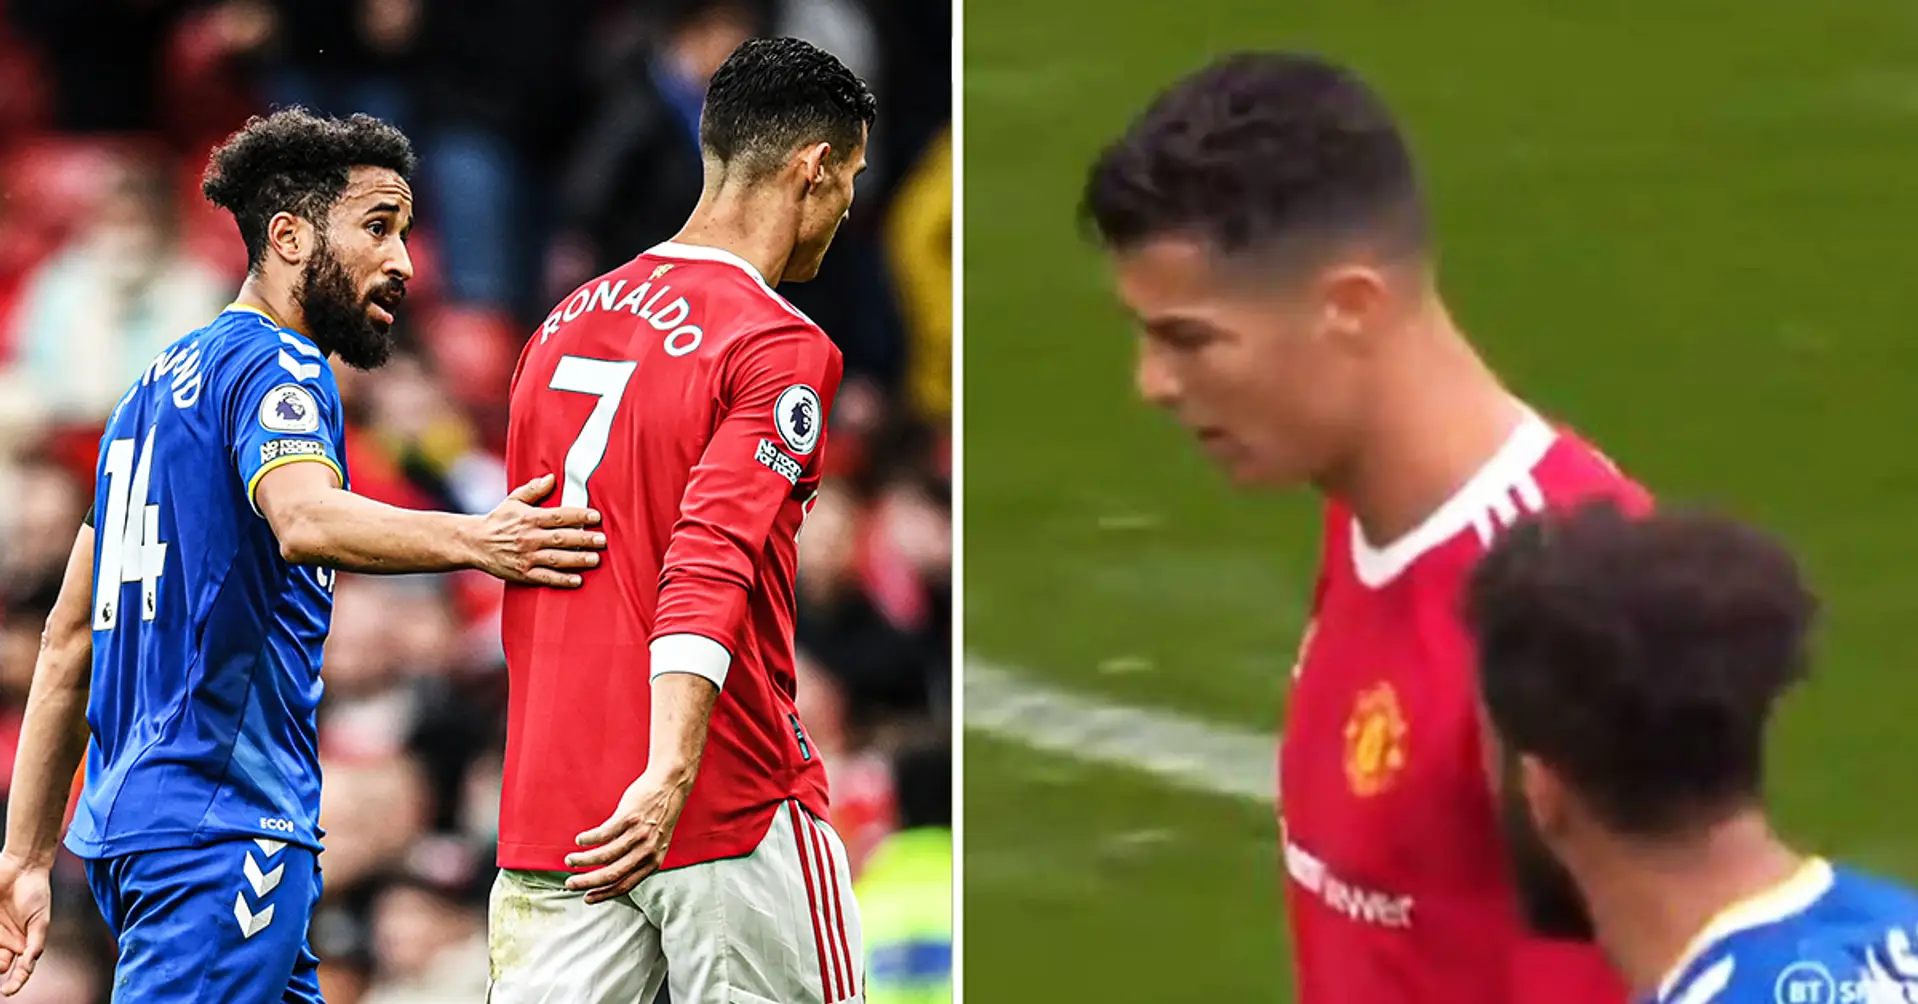 Revealed: what actually happened between CR7 and Everton star during match